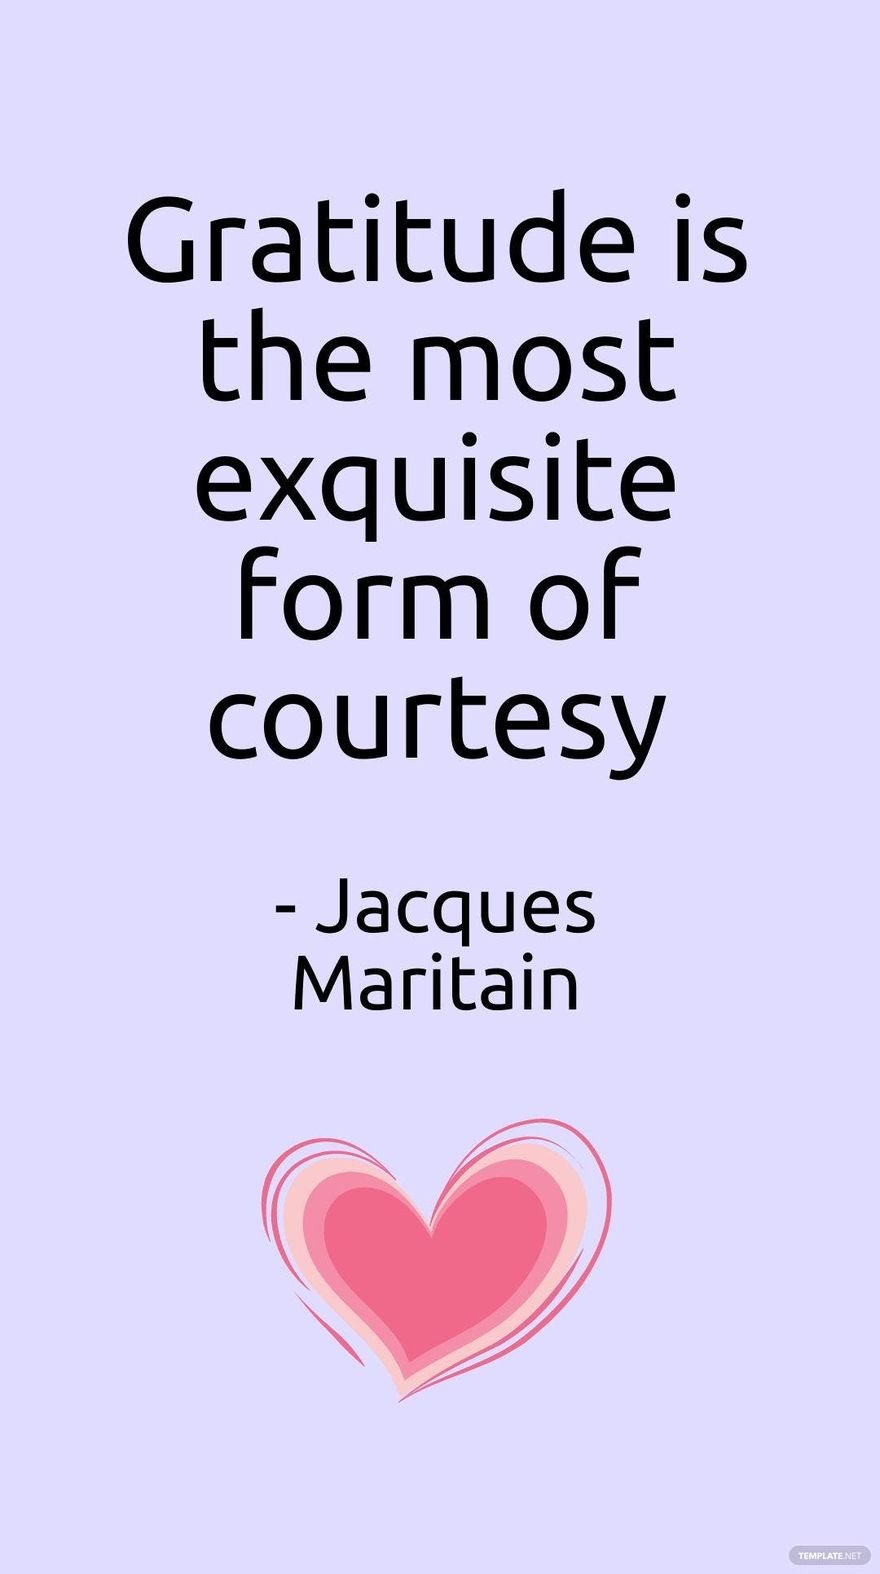 Free Jacques Maritain - Gratitude is the most exquisite form of courtesy in JPG